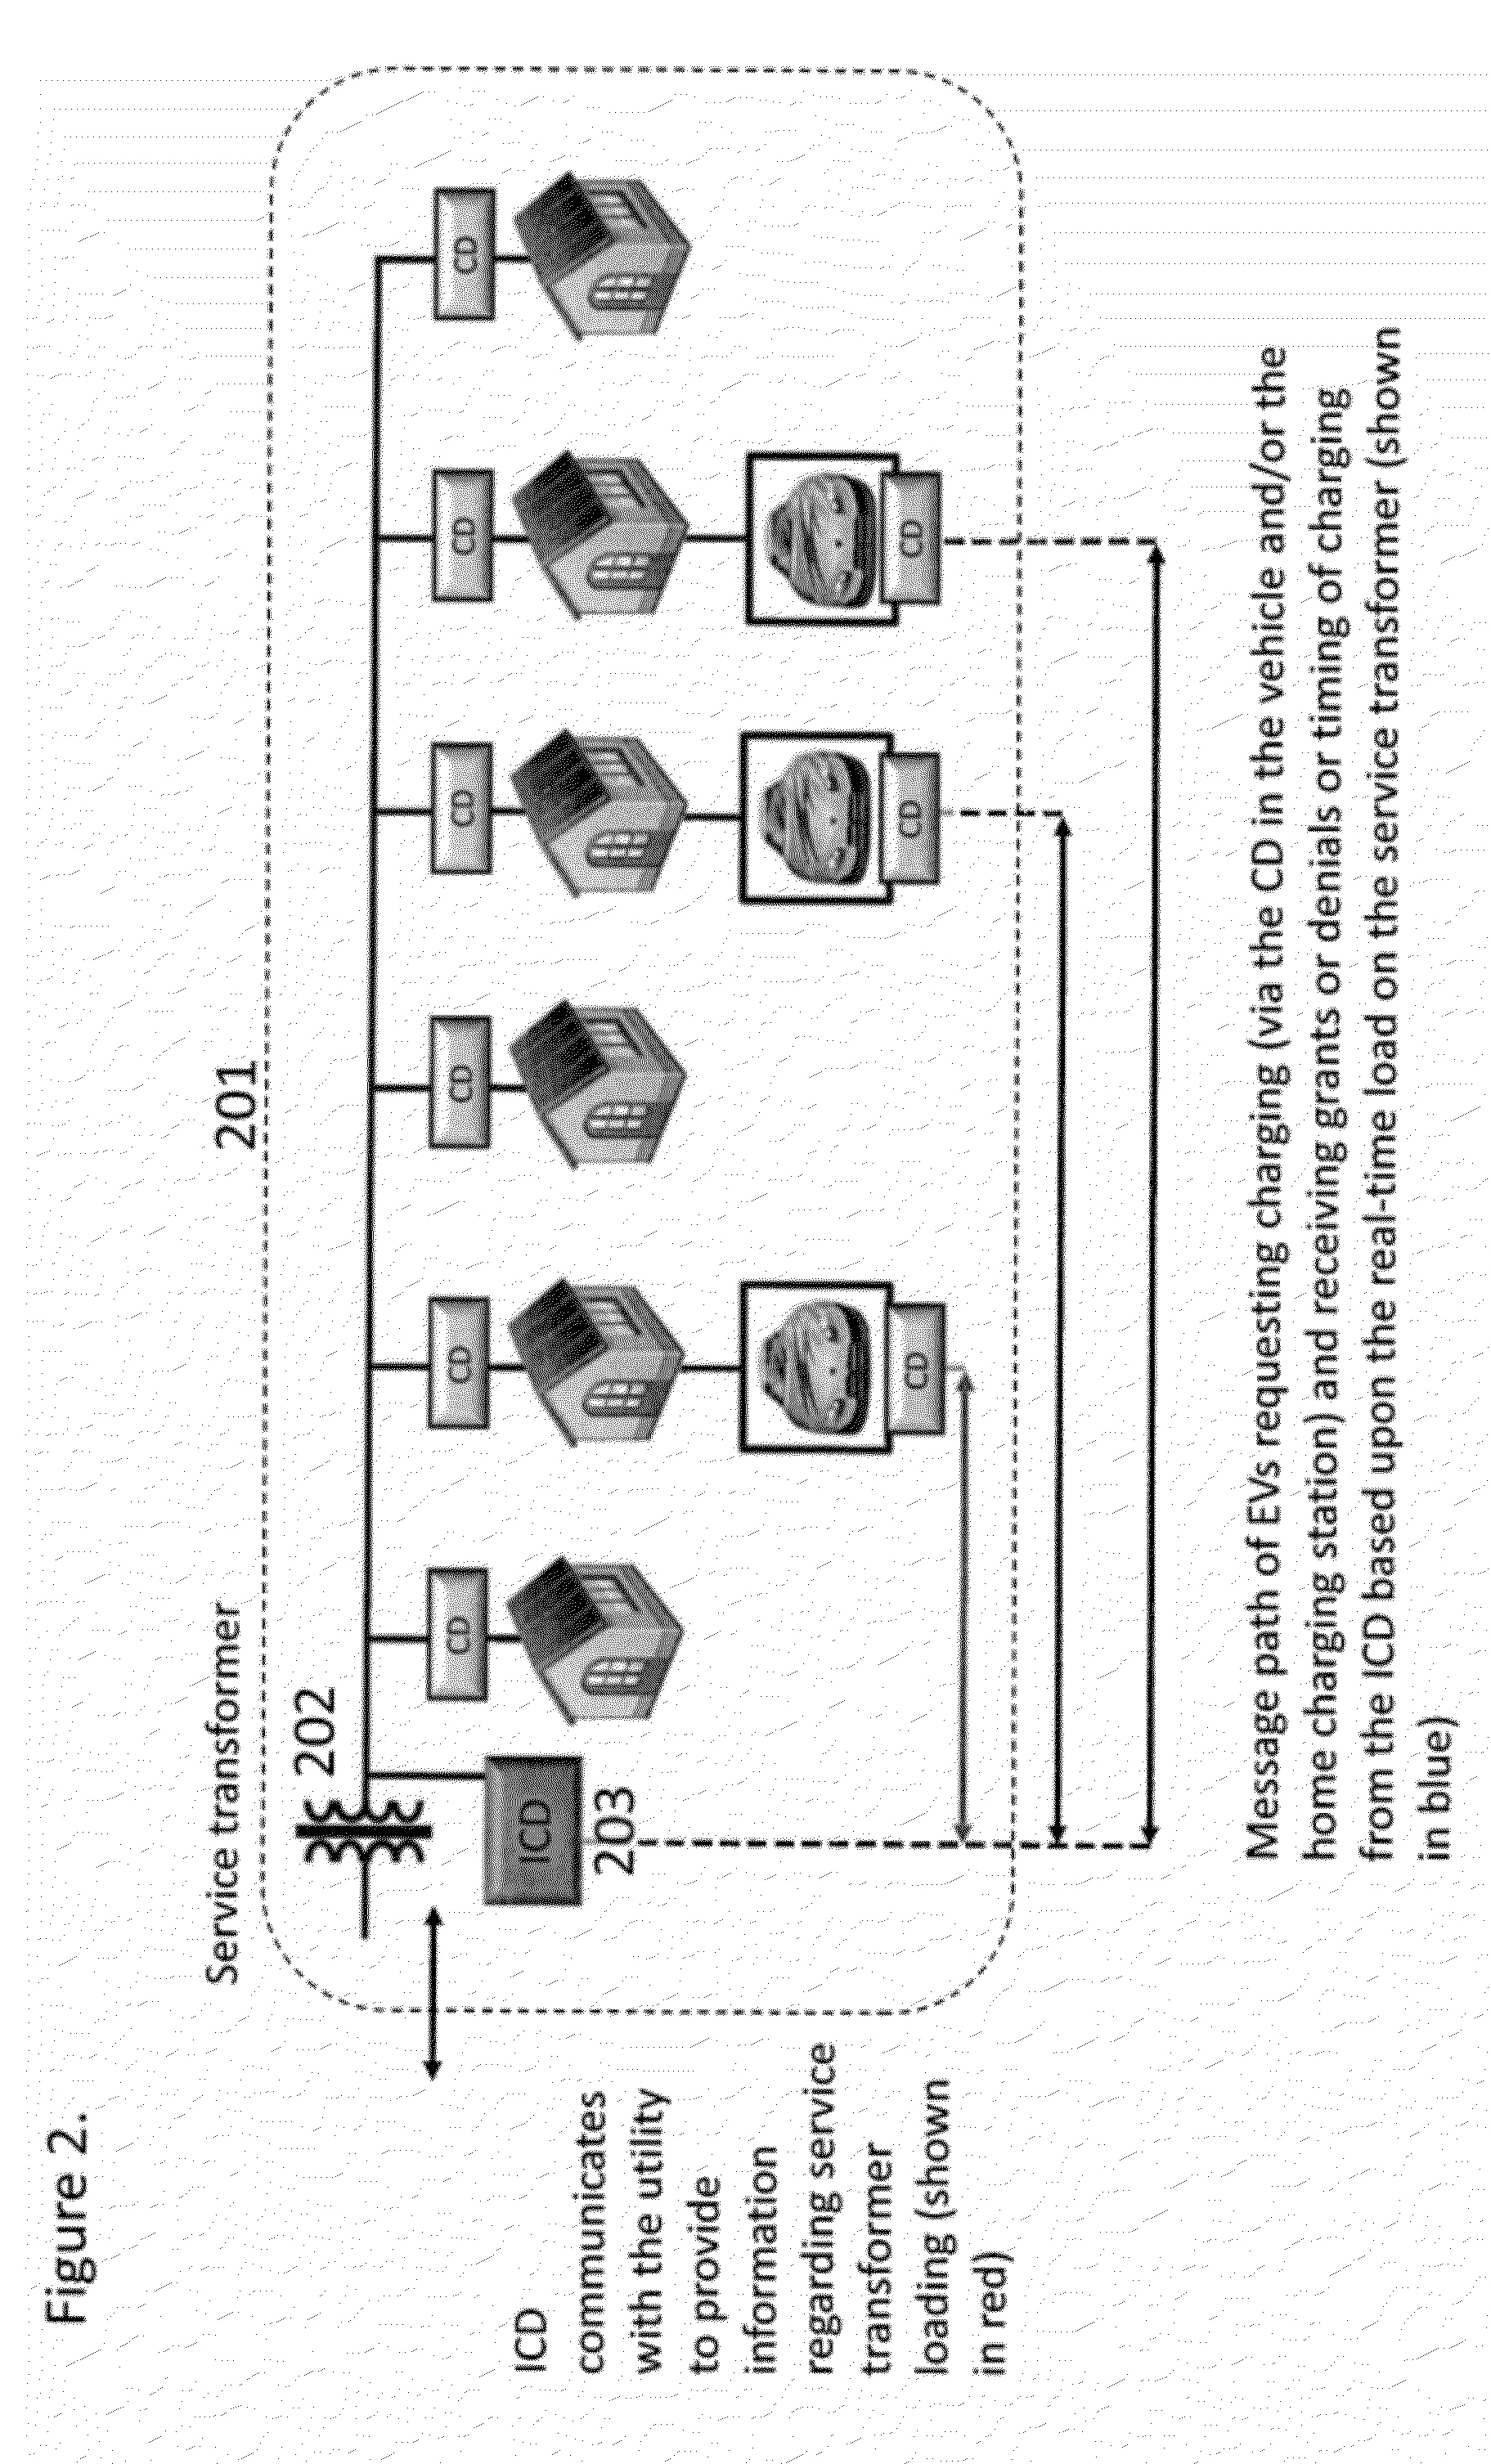 System and method for single and multizonal optimization of utility services delivery and utilization